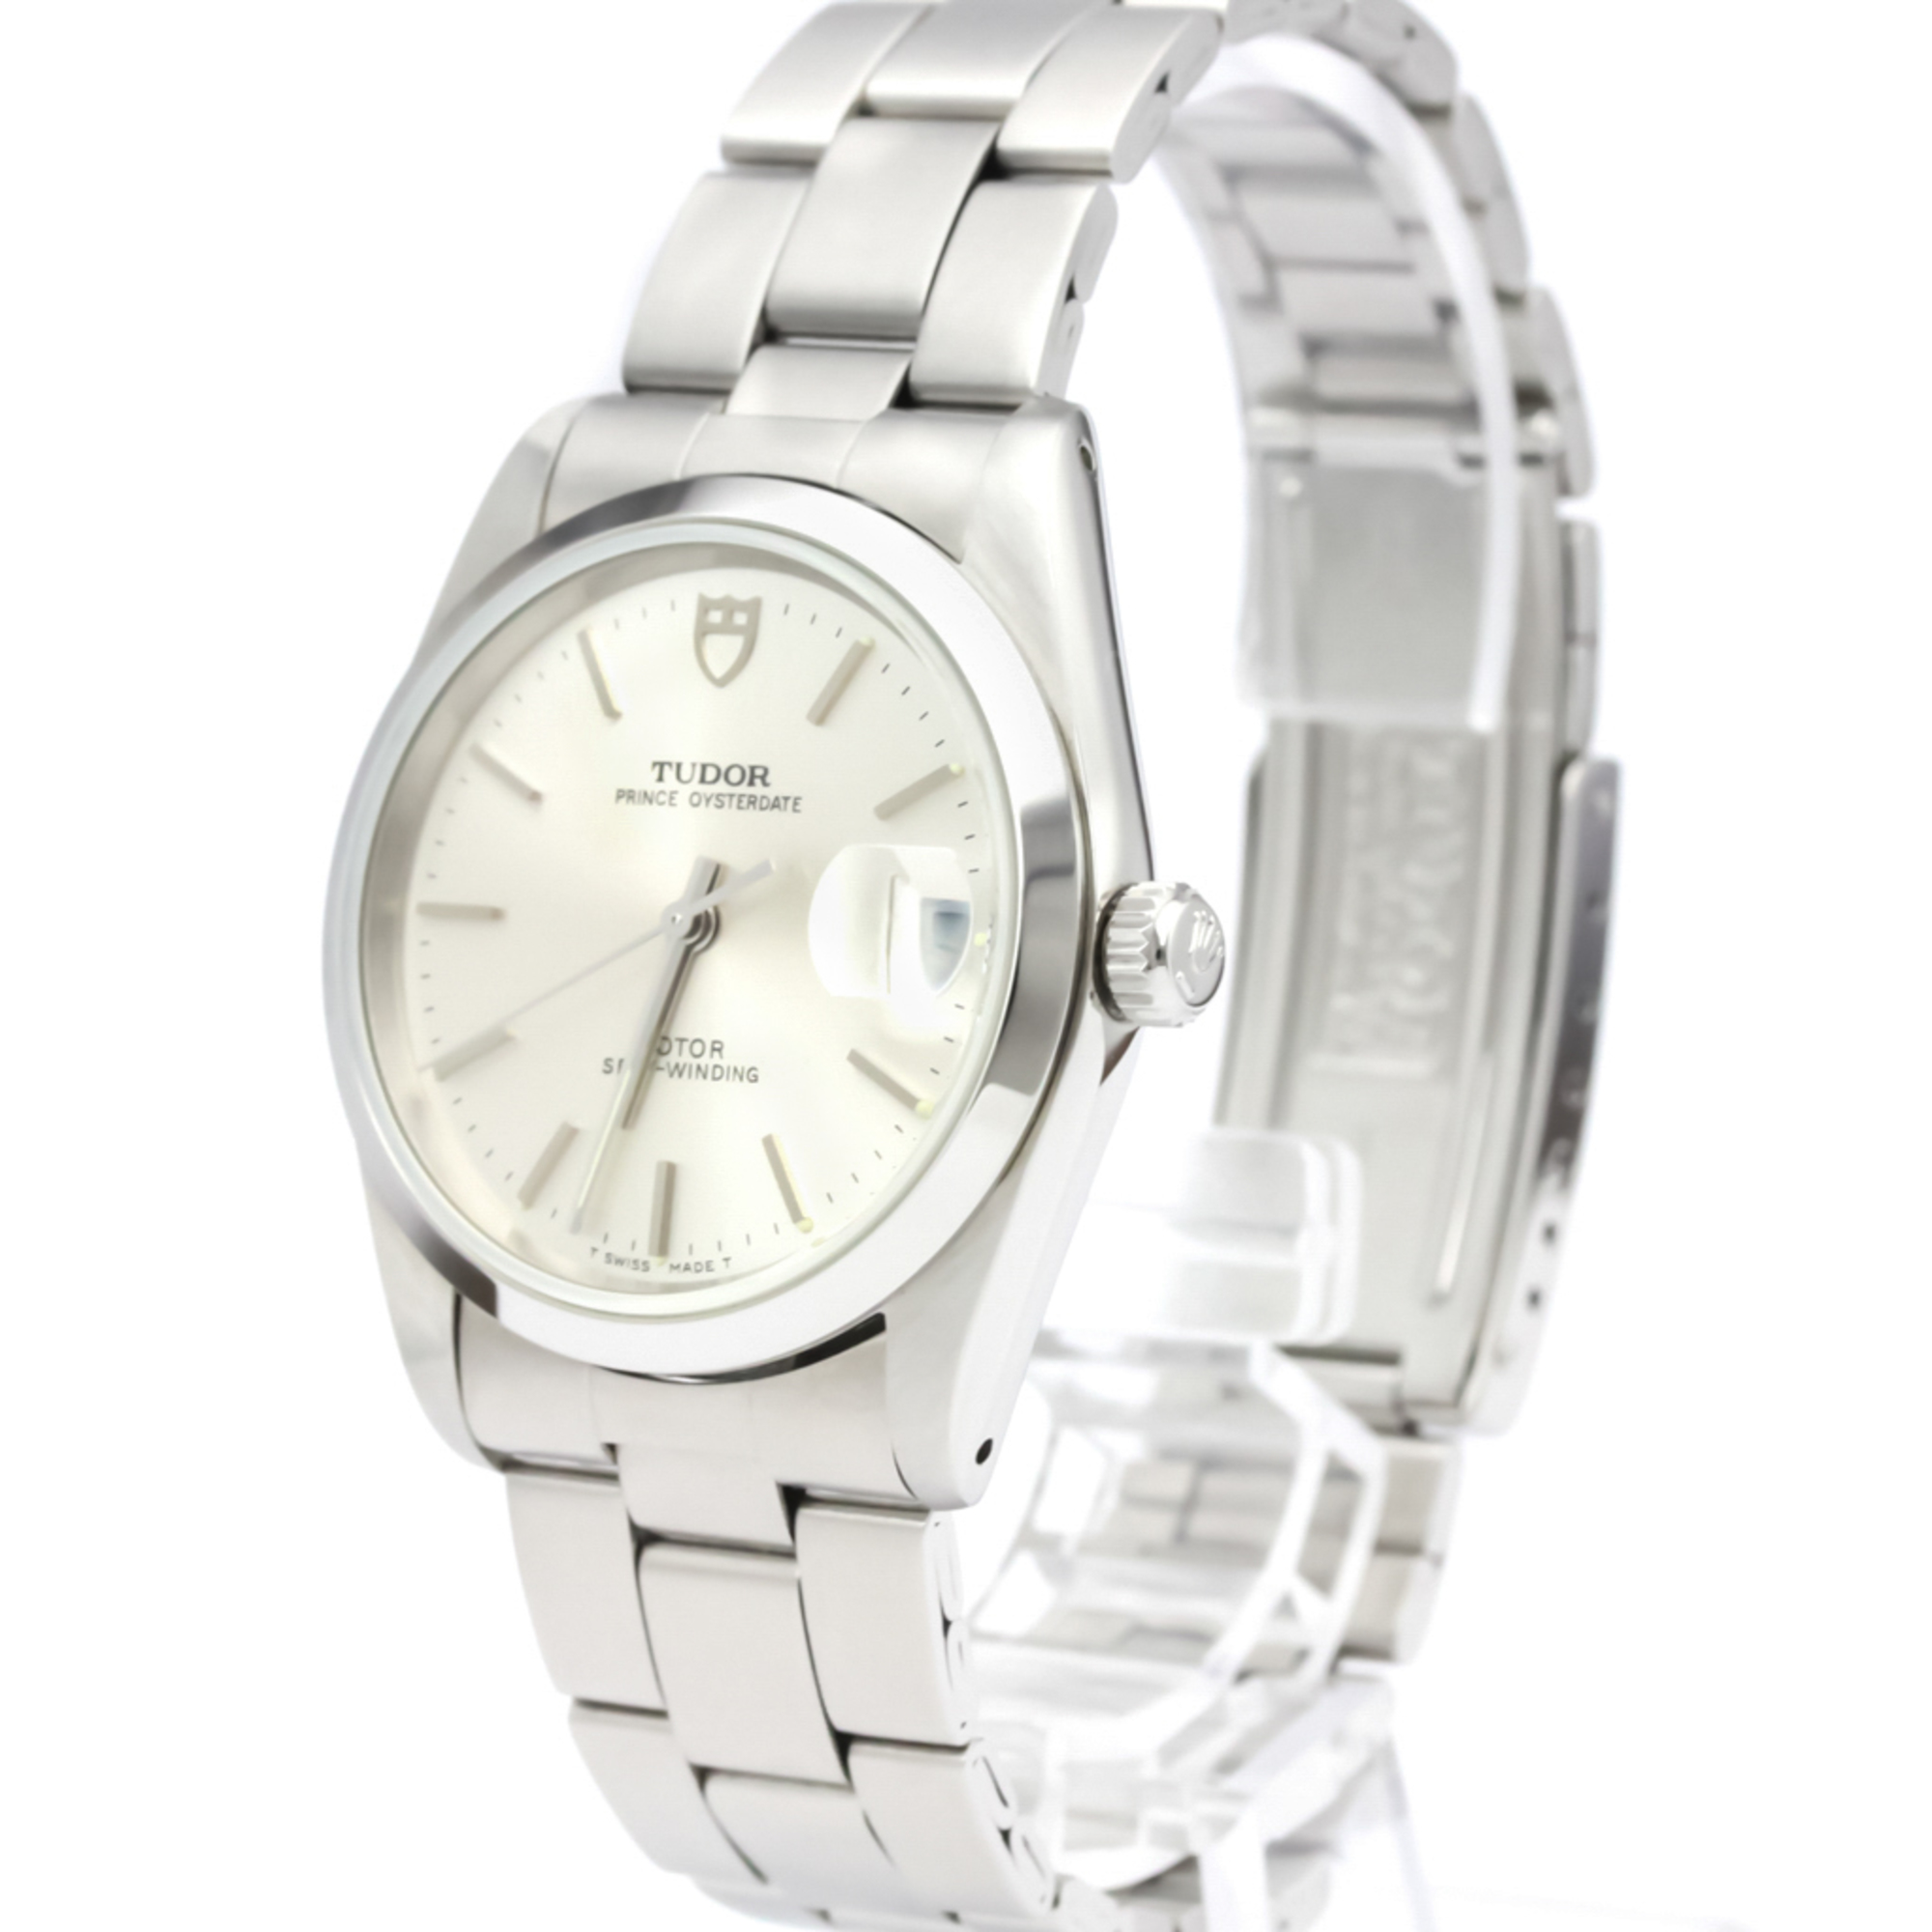 TUDOR Prince Oyster Date Steel Automatic Mens Watch 74000N